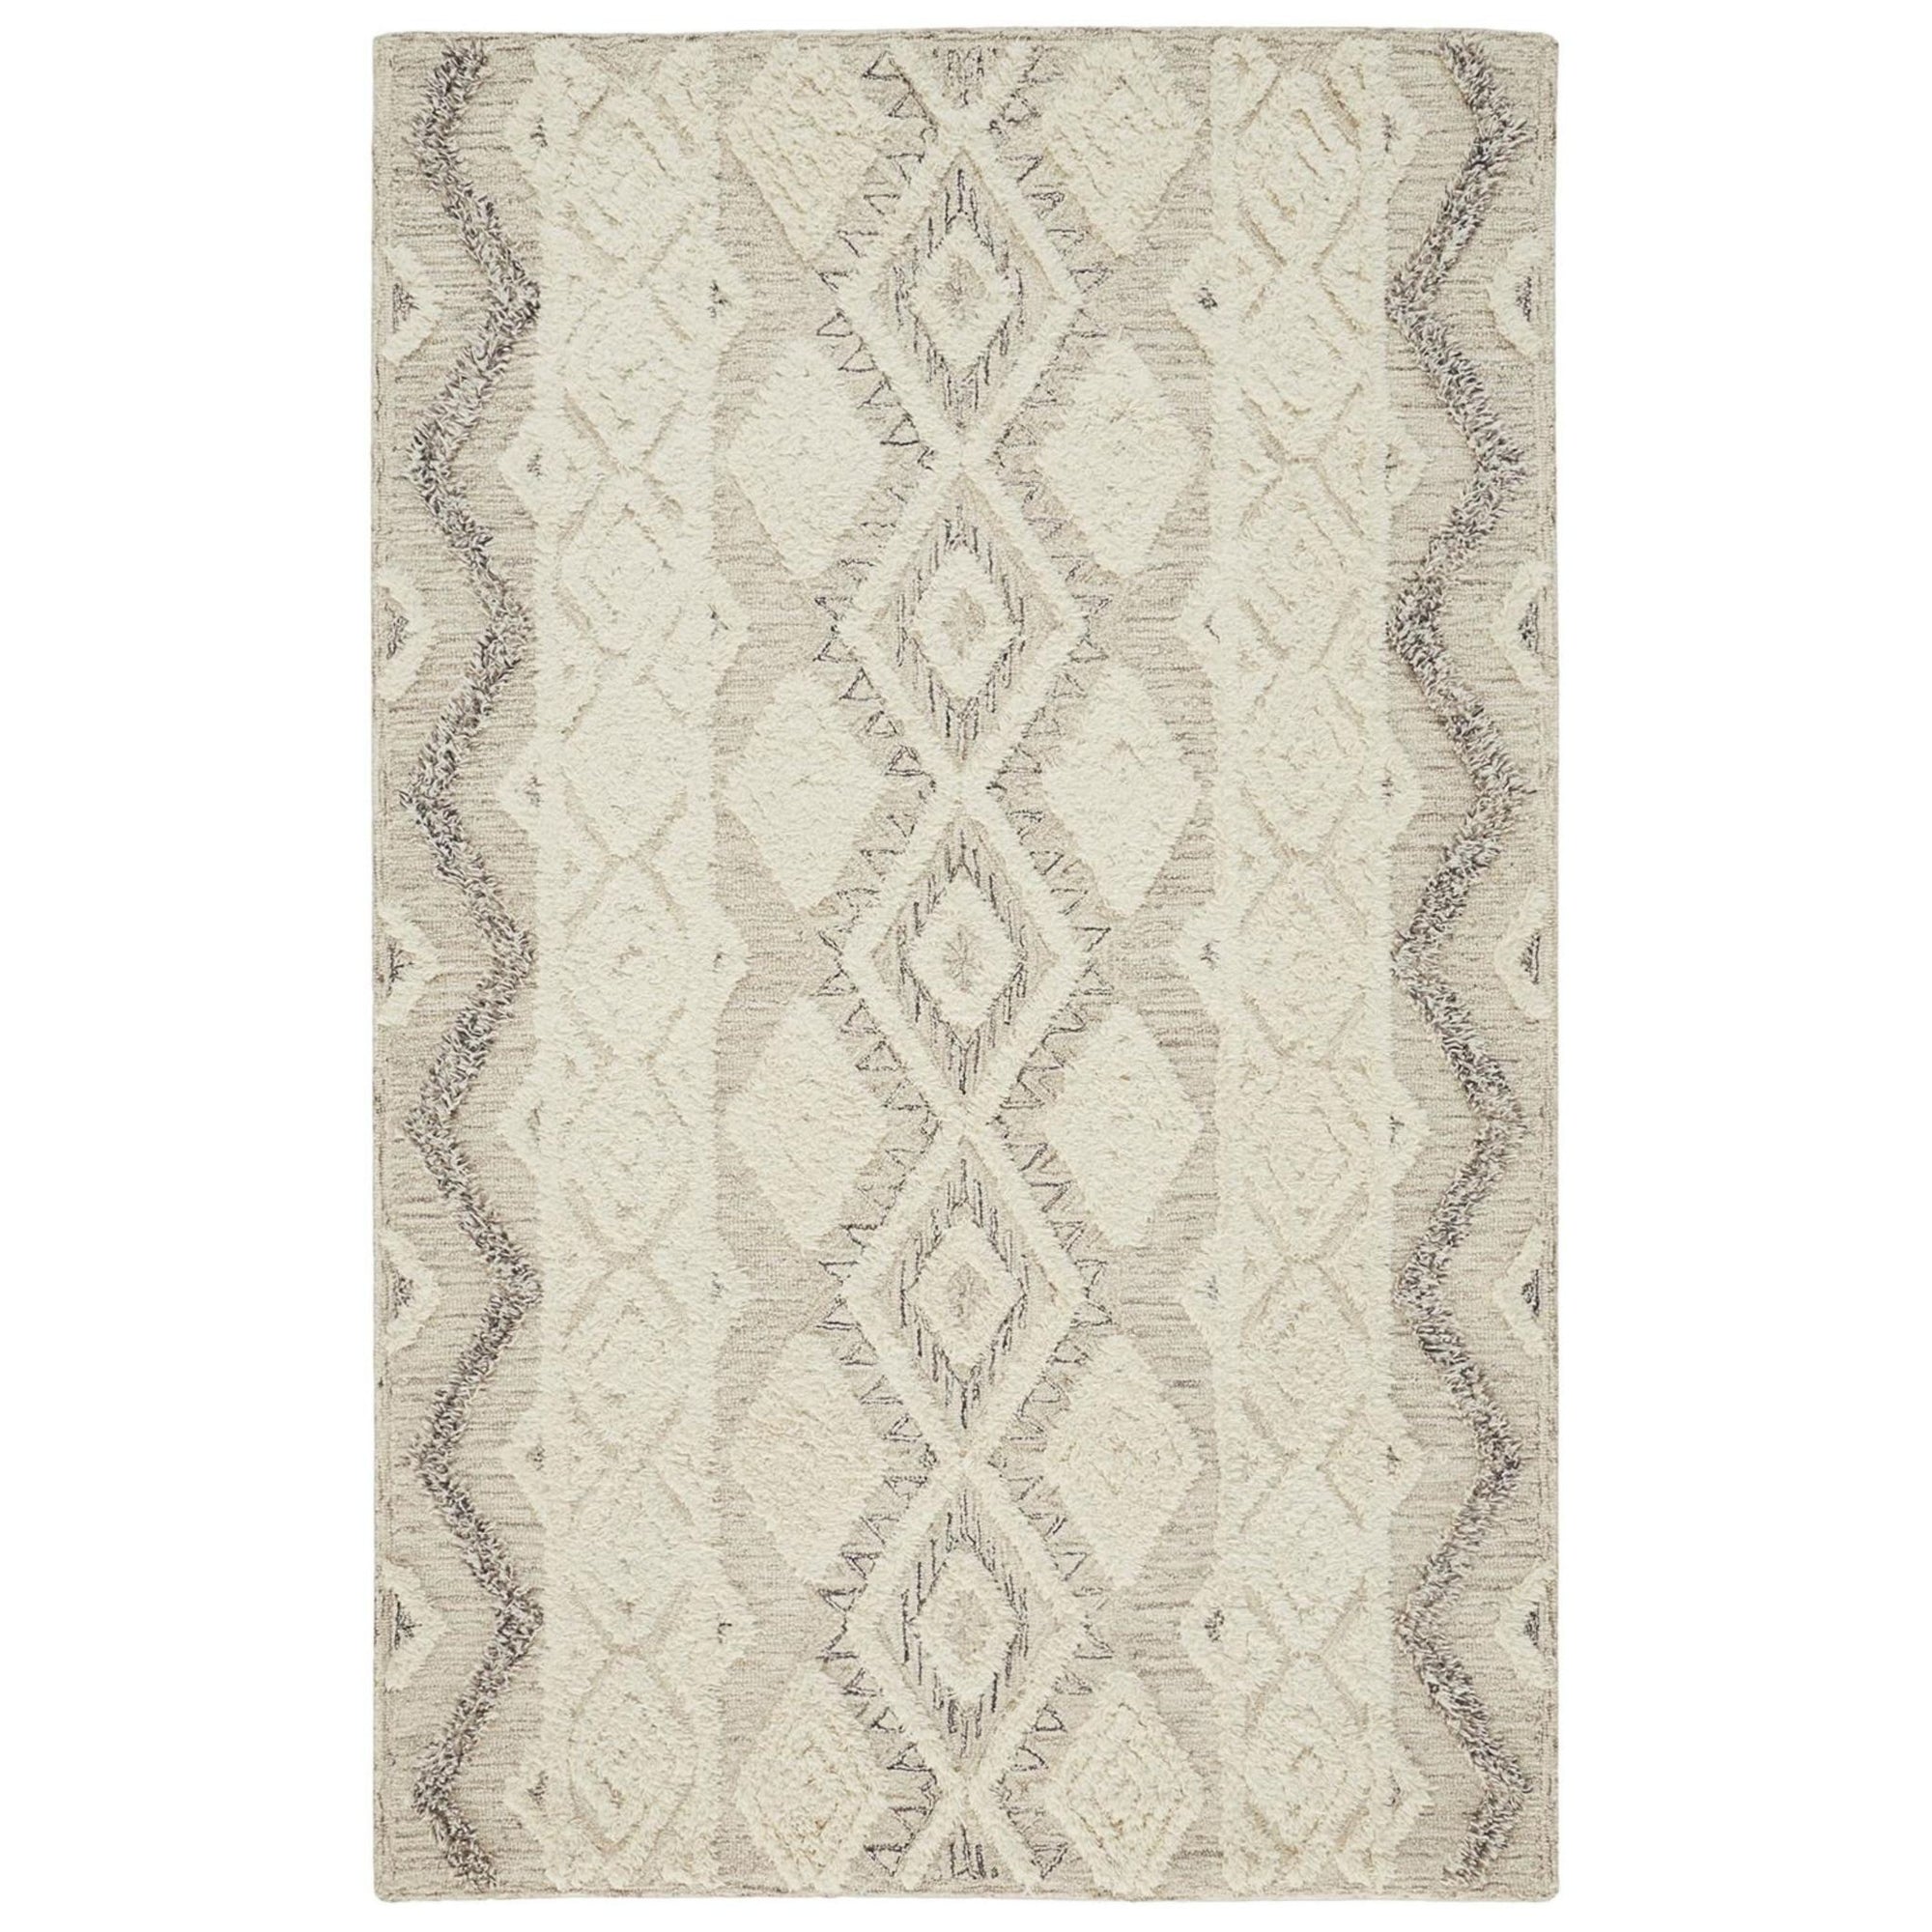 Anica Moroccan Wool Rug in Gray